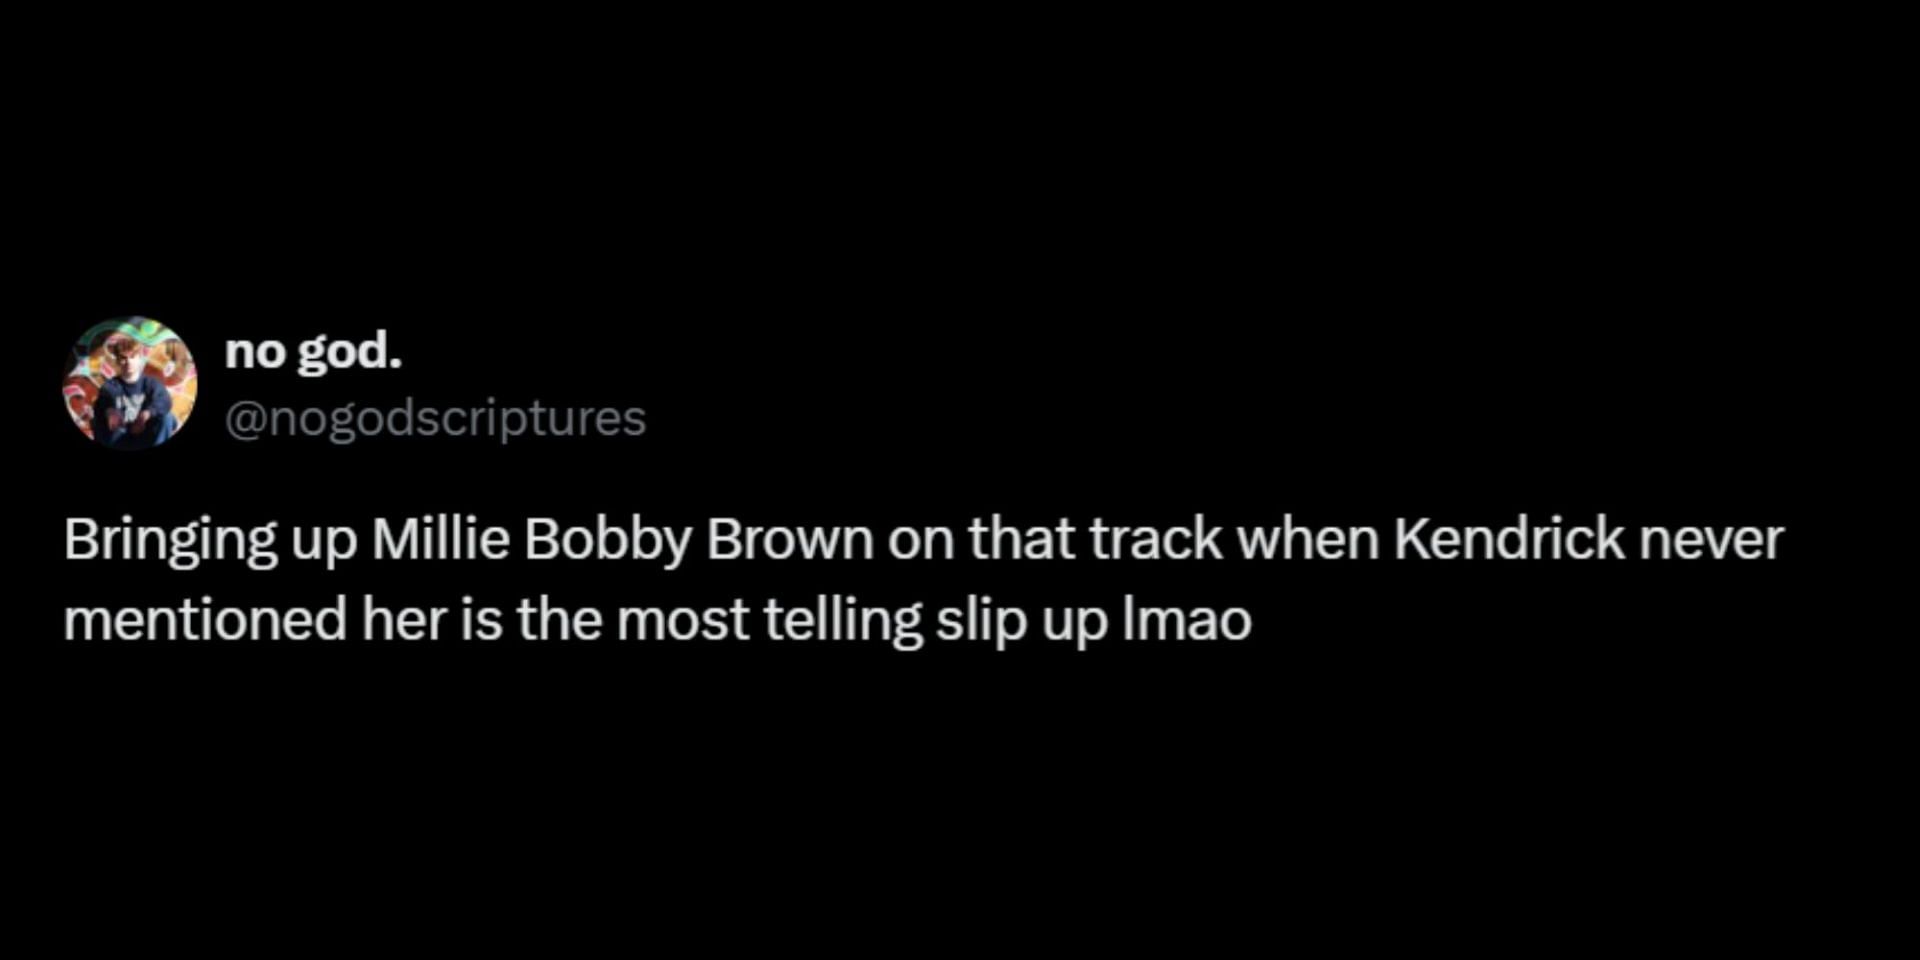 Netizens react to Drizzy&#039;s Millie Bobby Brown name-drop on &quot;The Heart Part 6&quot;. (Image via X/@nogodscriptures)